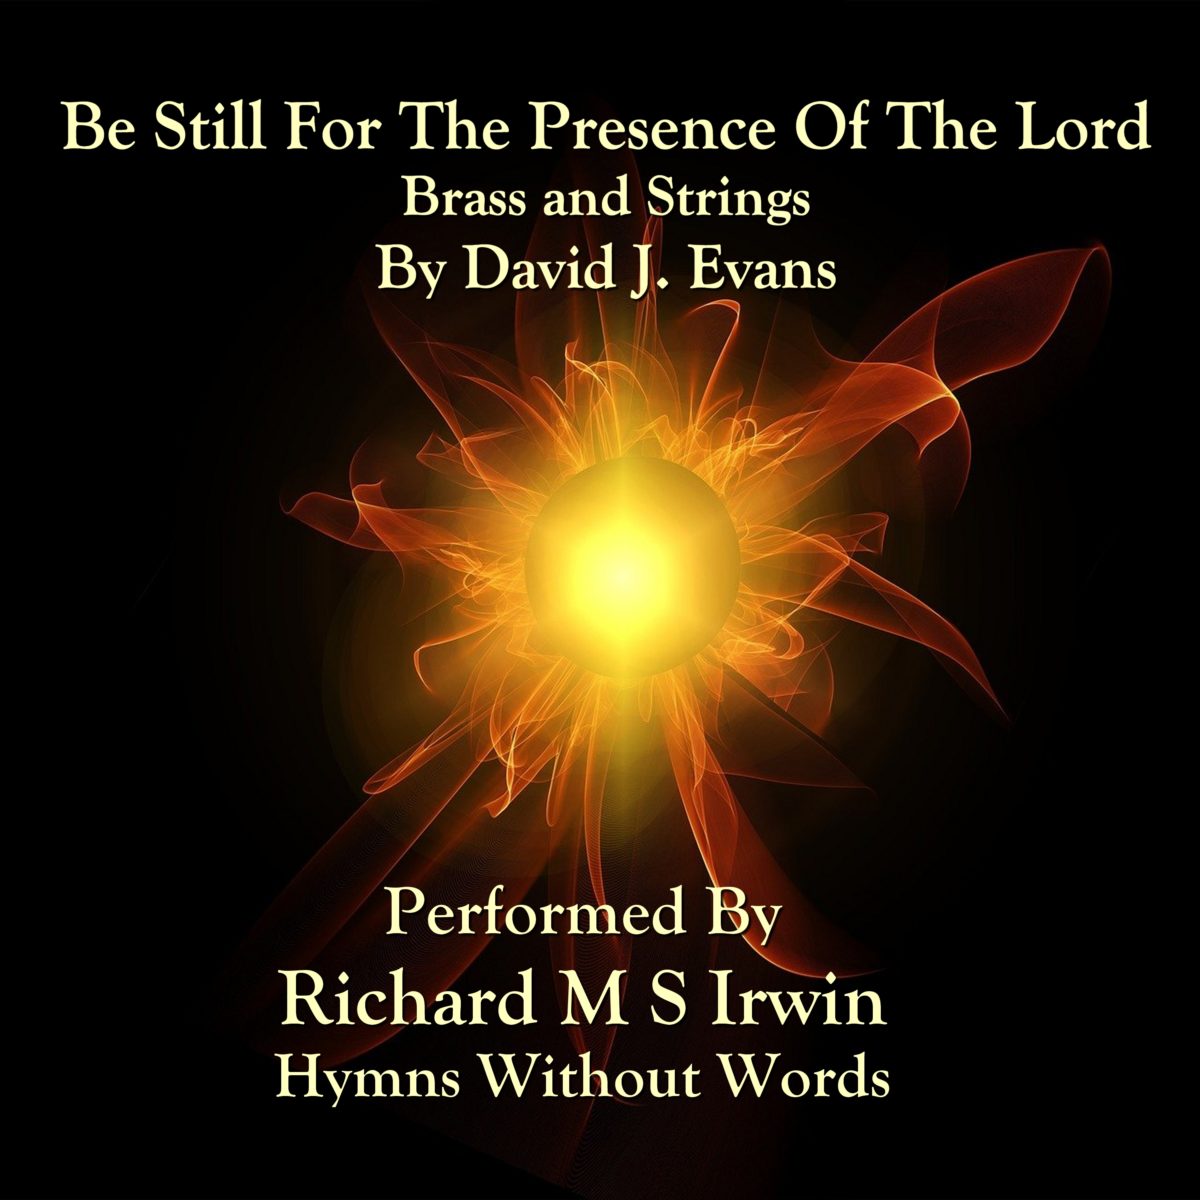 Be Still For The Presence Of The Lord